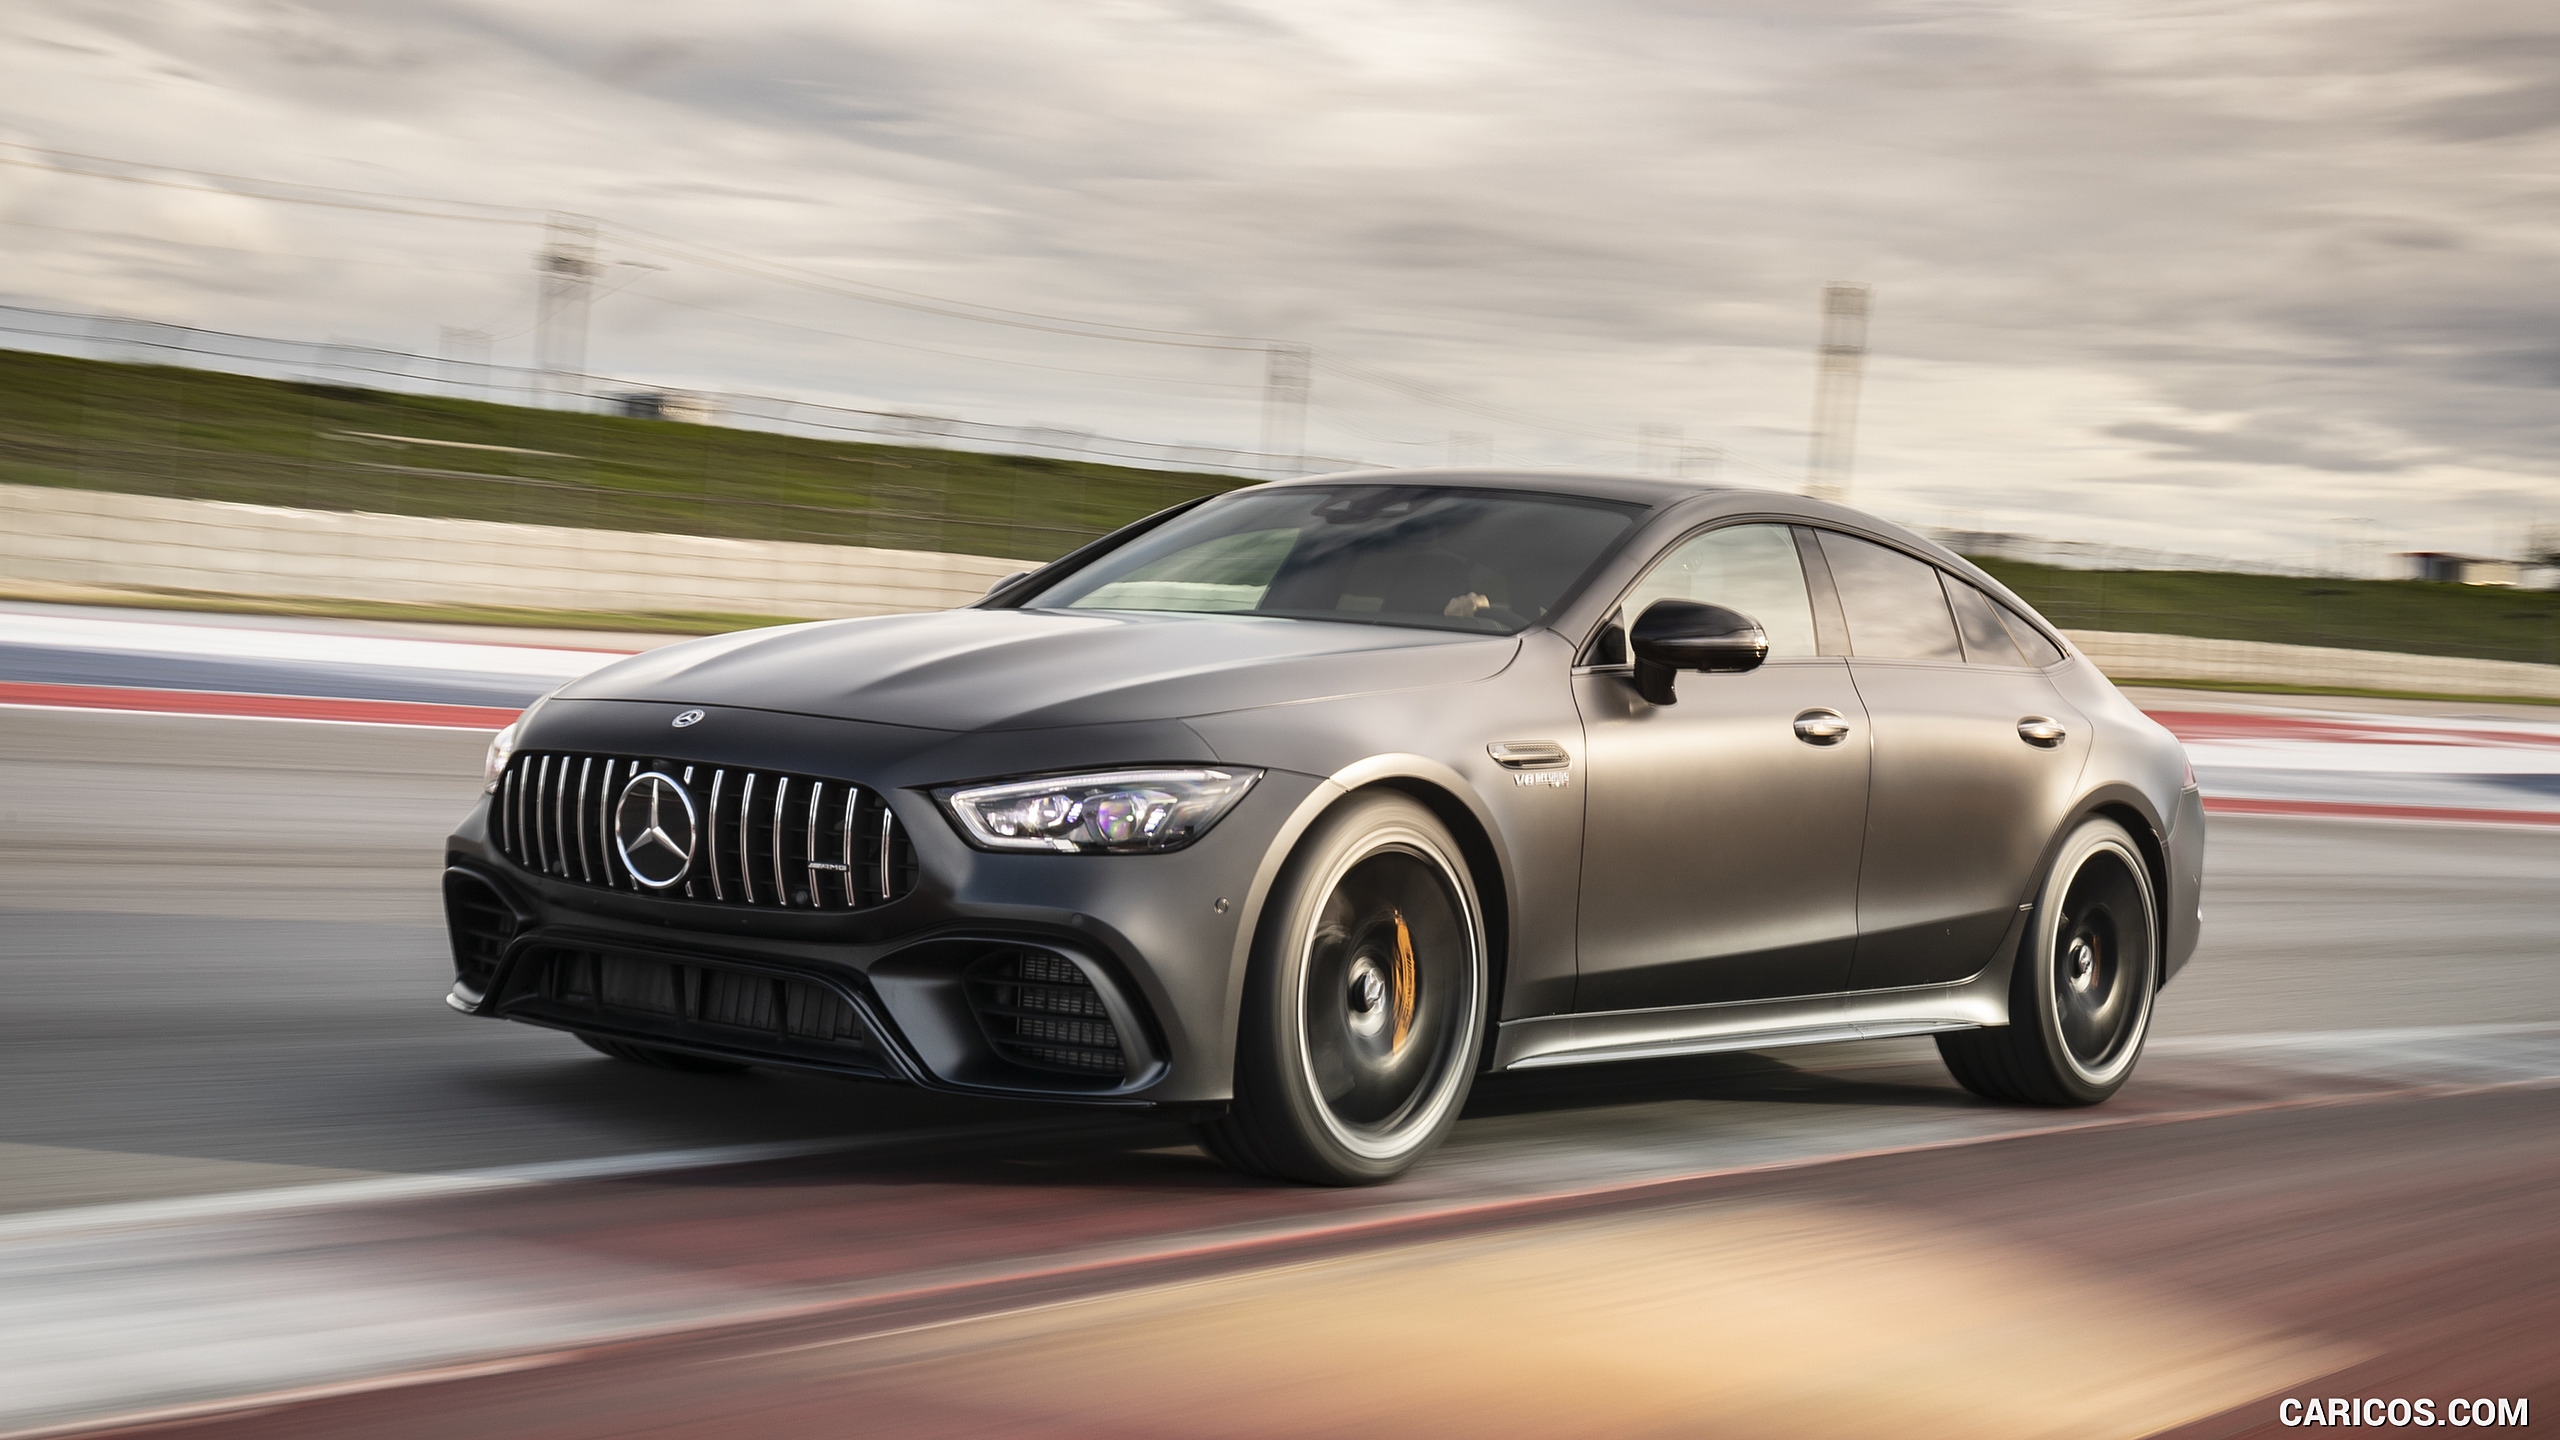 2019 Mercedes-AMG GT 63 S 4MATIC+ 4-Door Coupe - Front Three-Quarter, #173 of 427